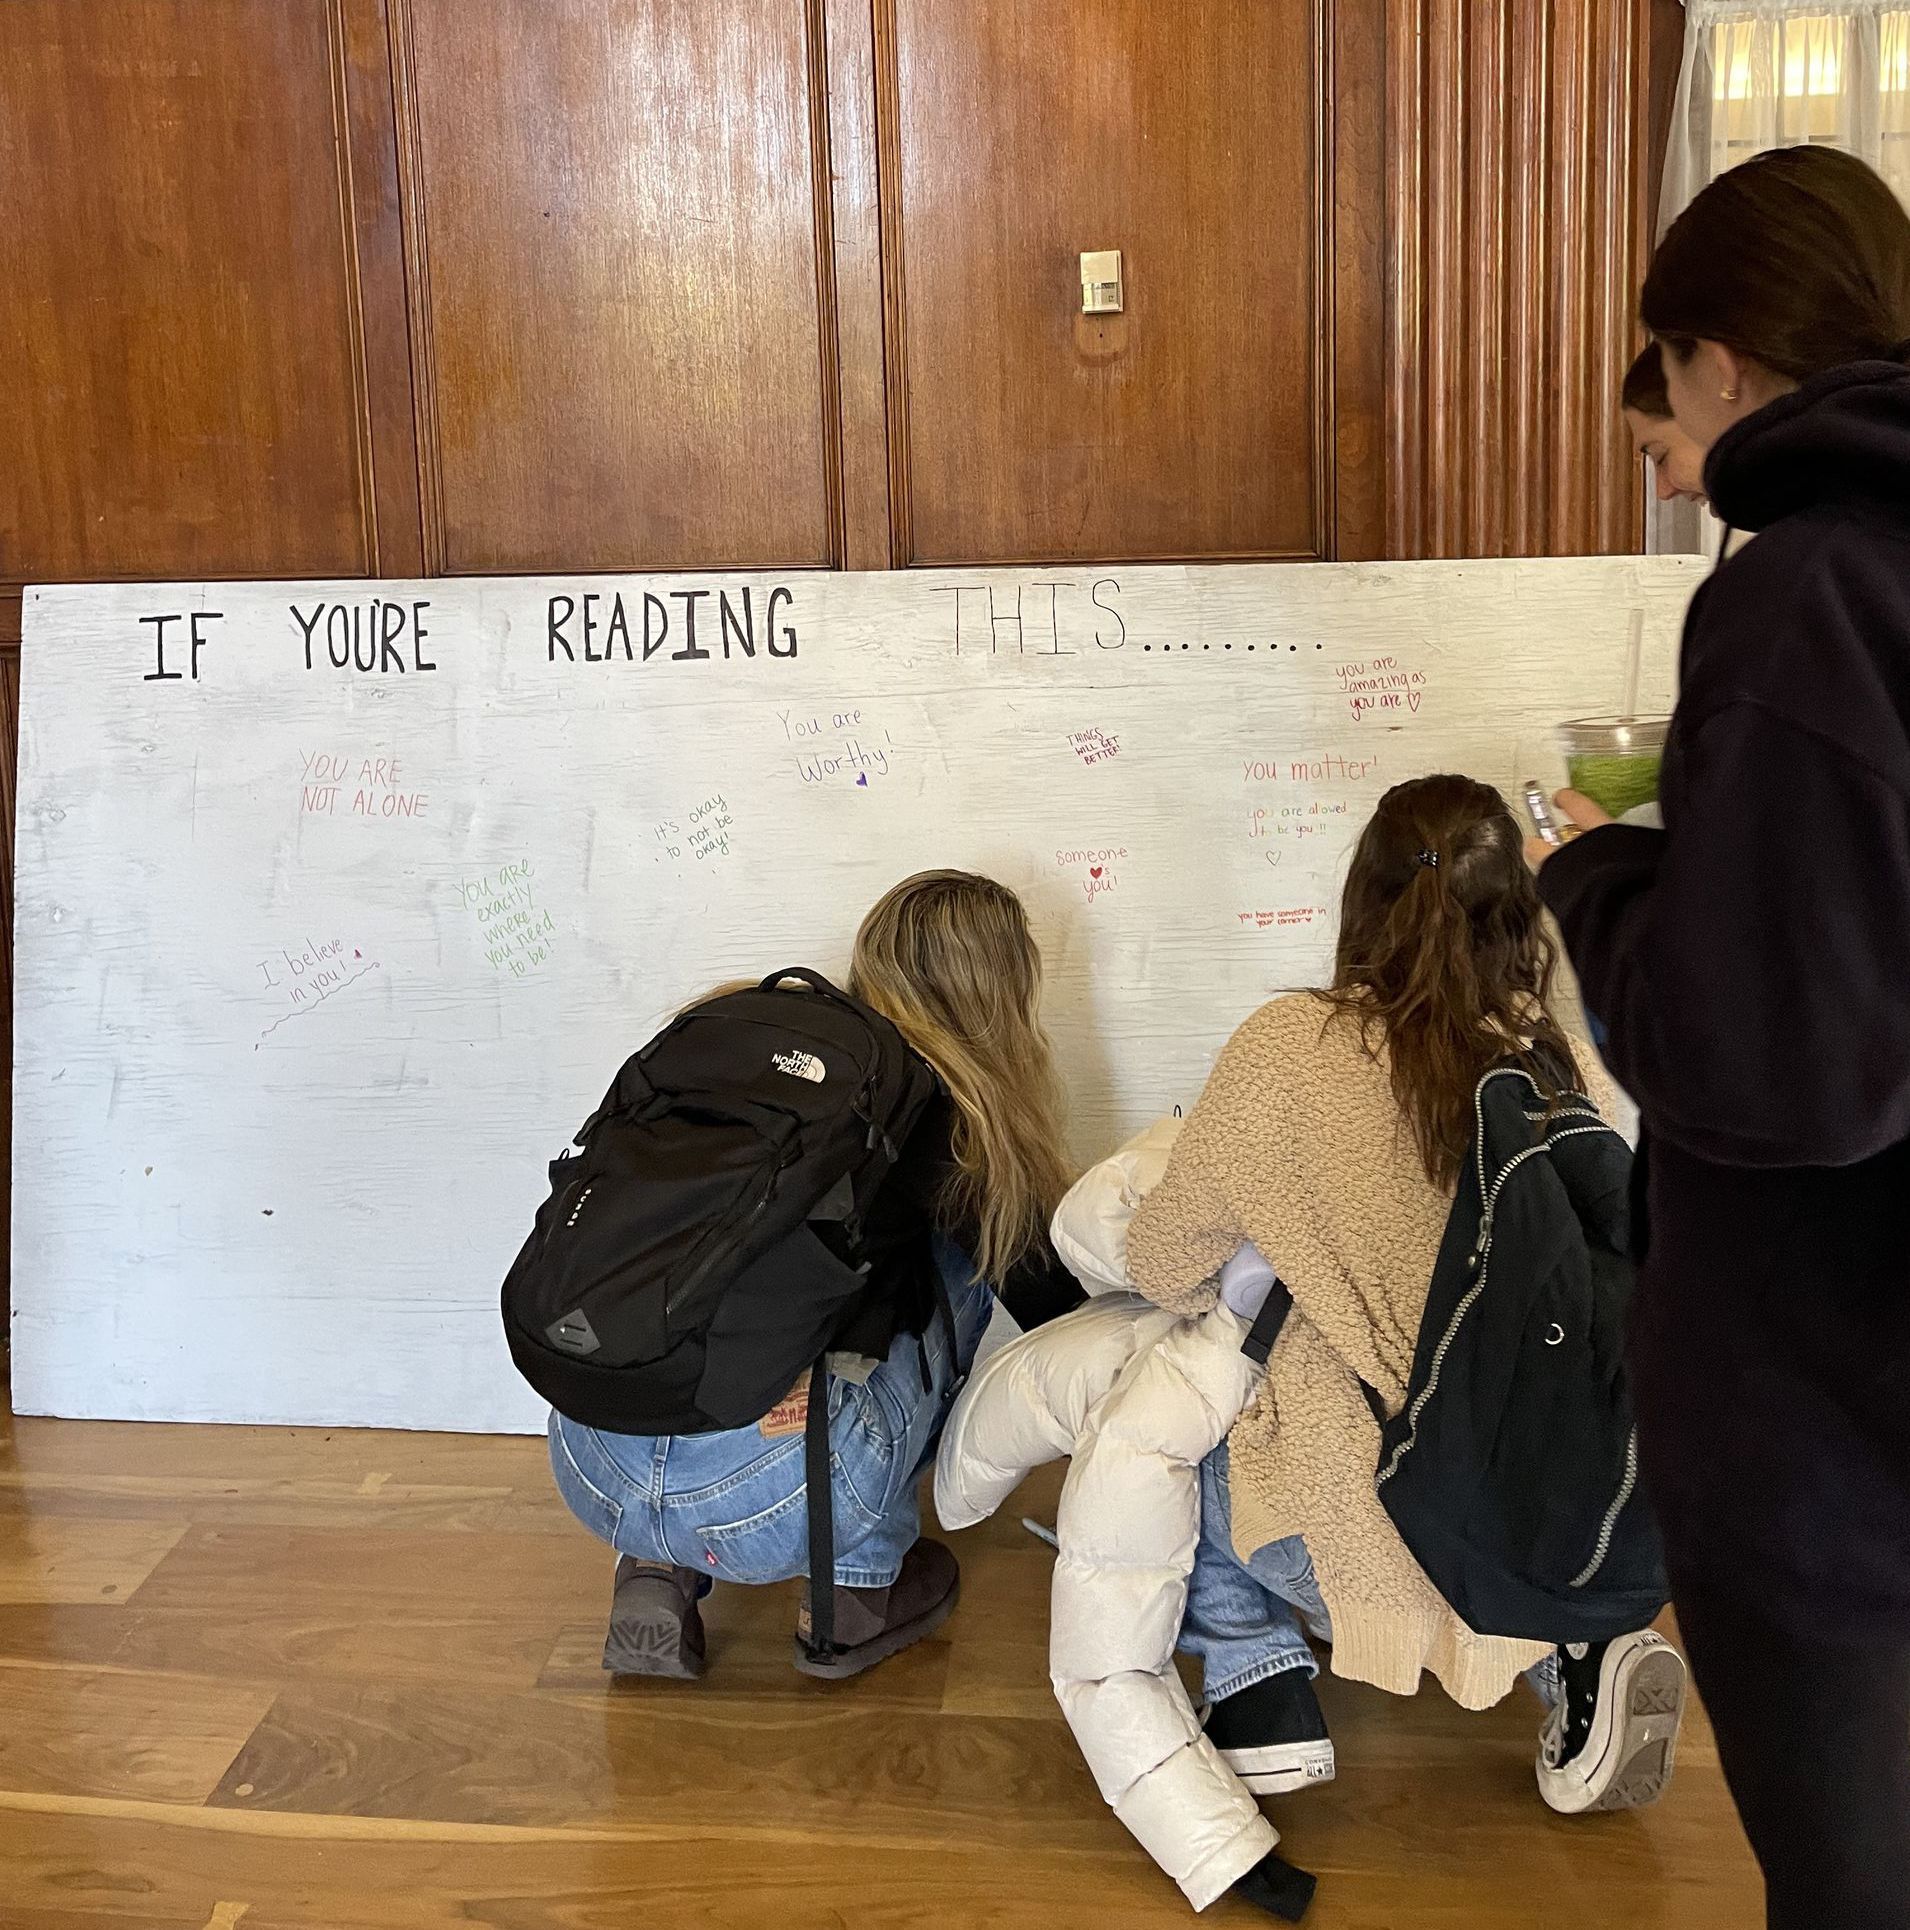 Conference participants write on a whiteboard 